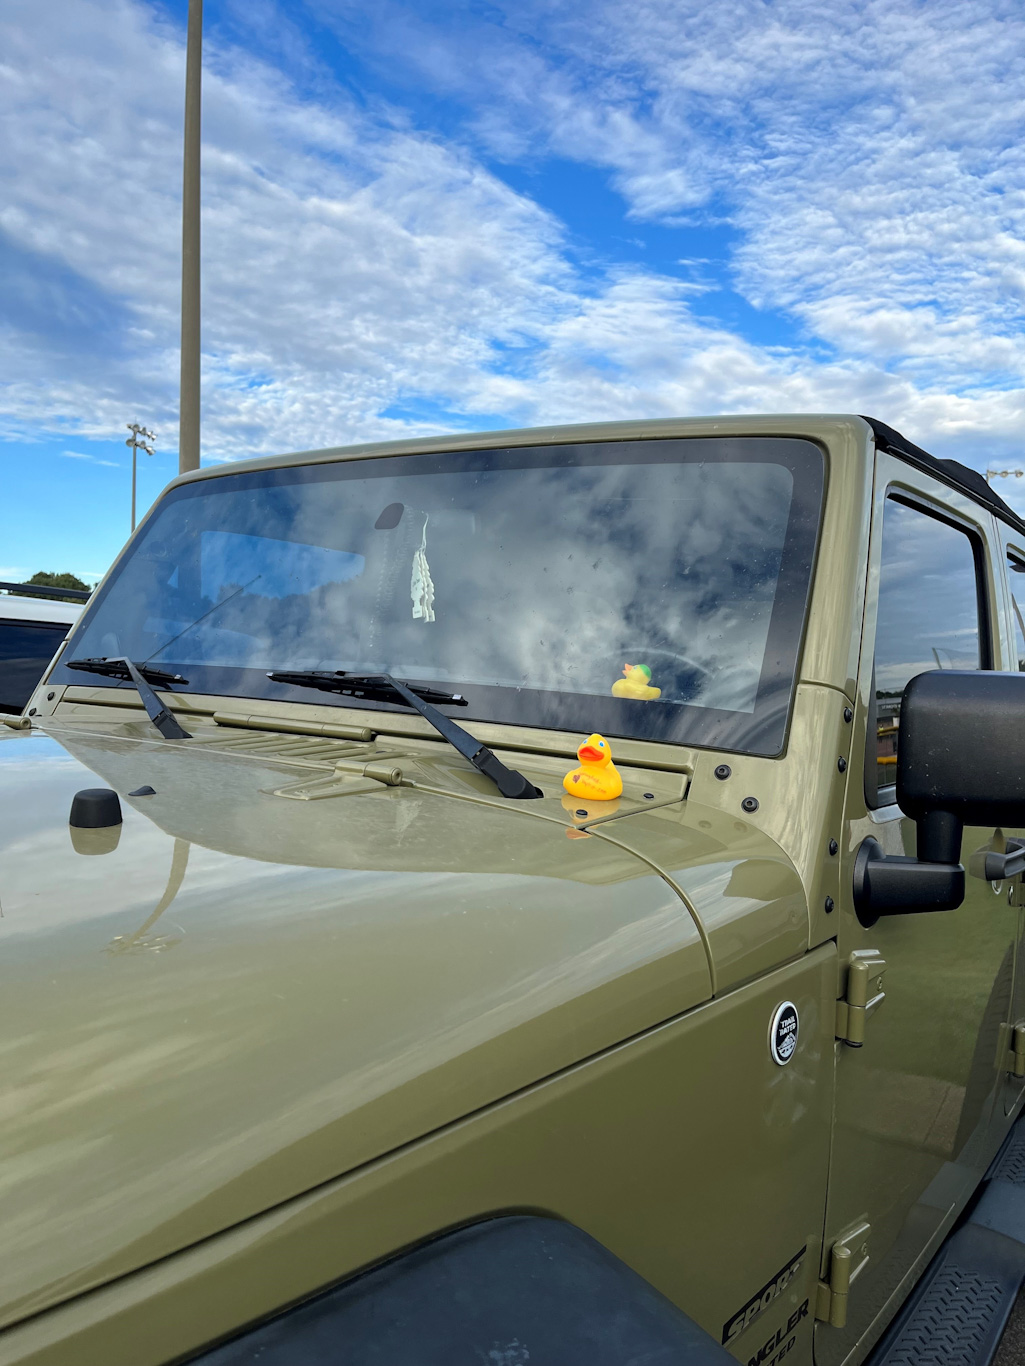 Duck planted on a jeep